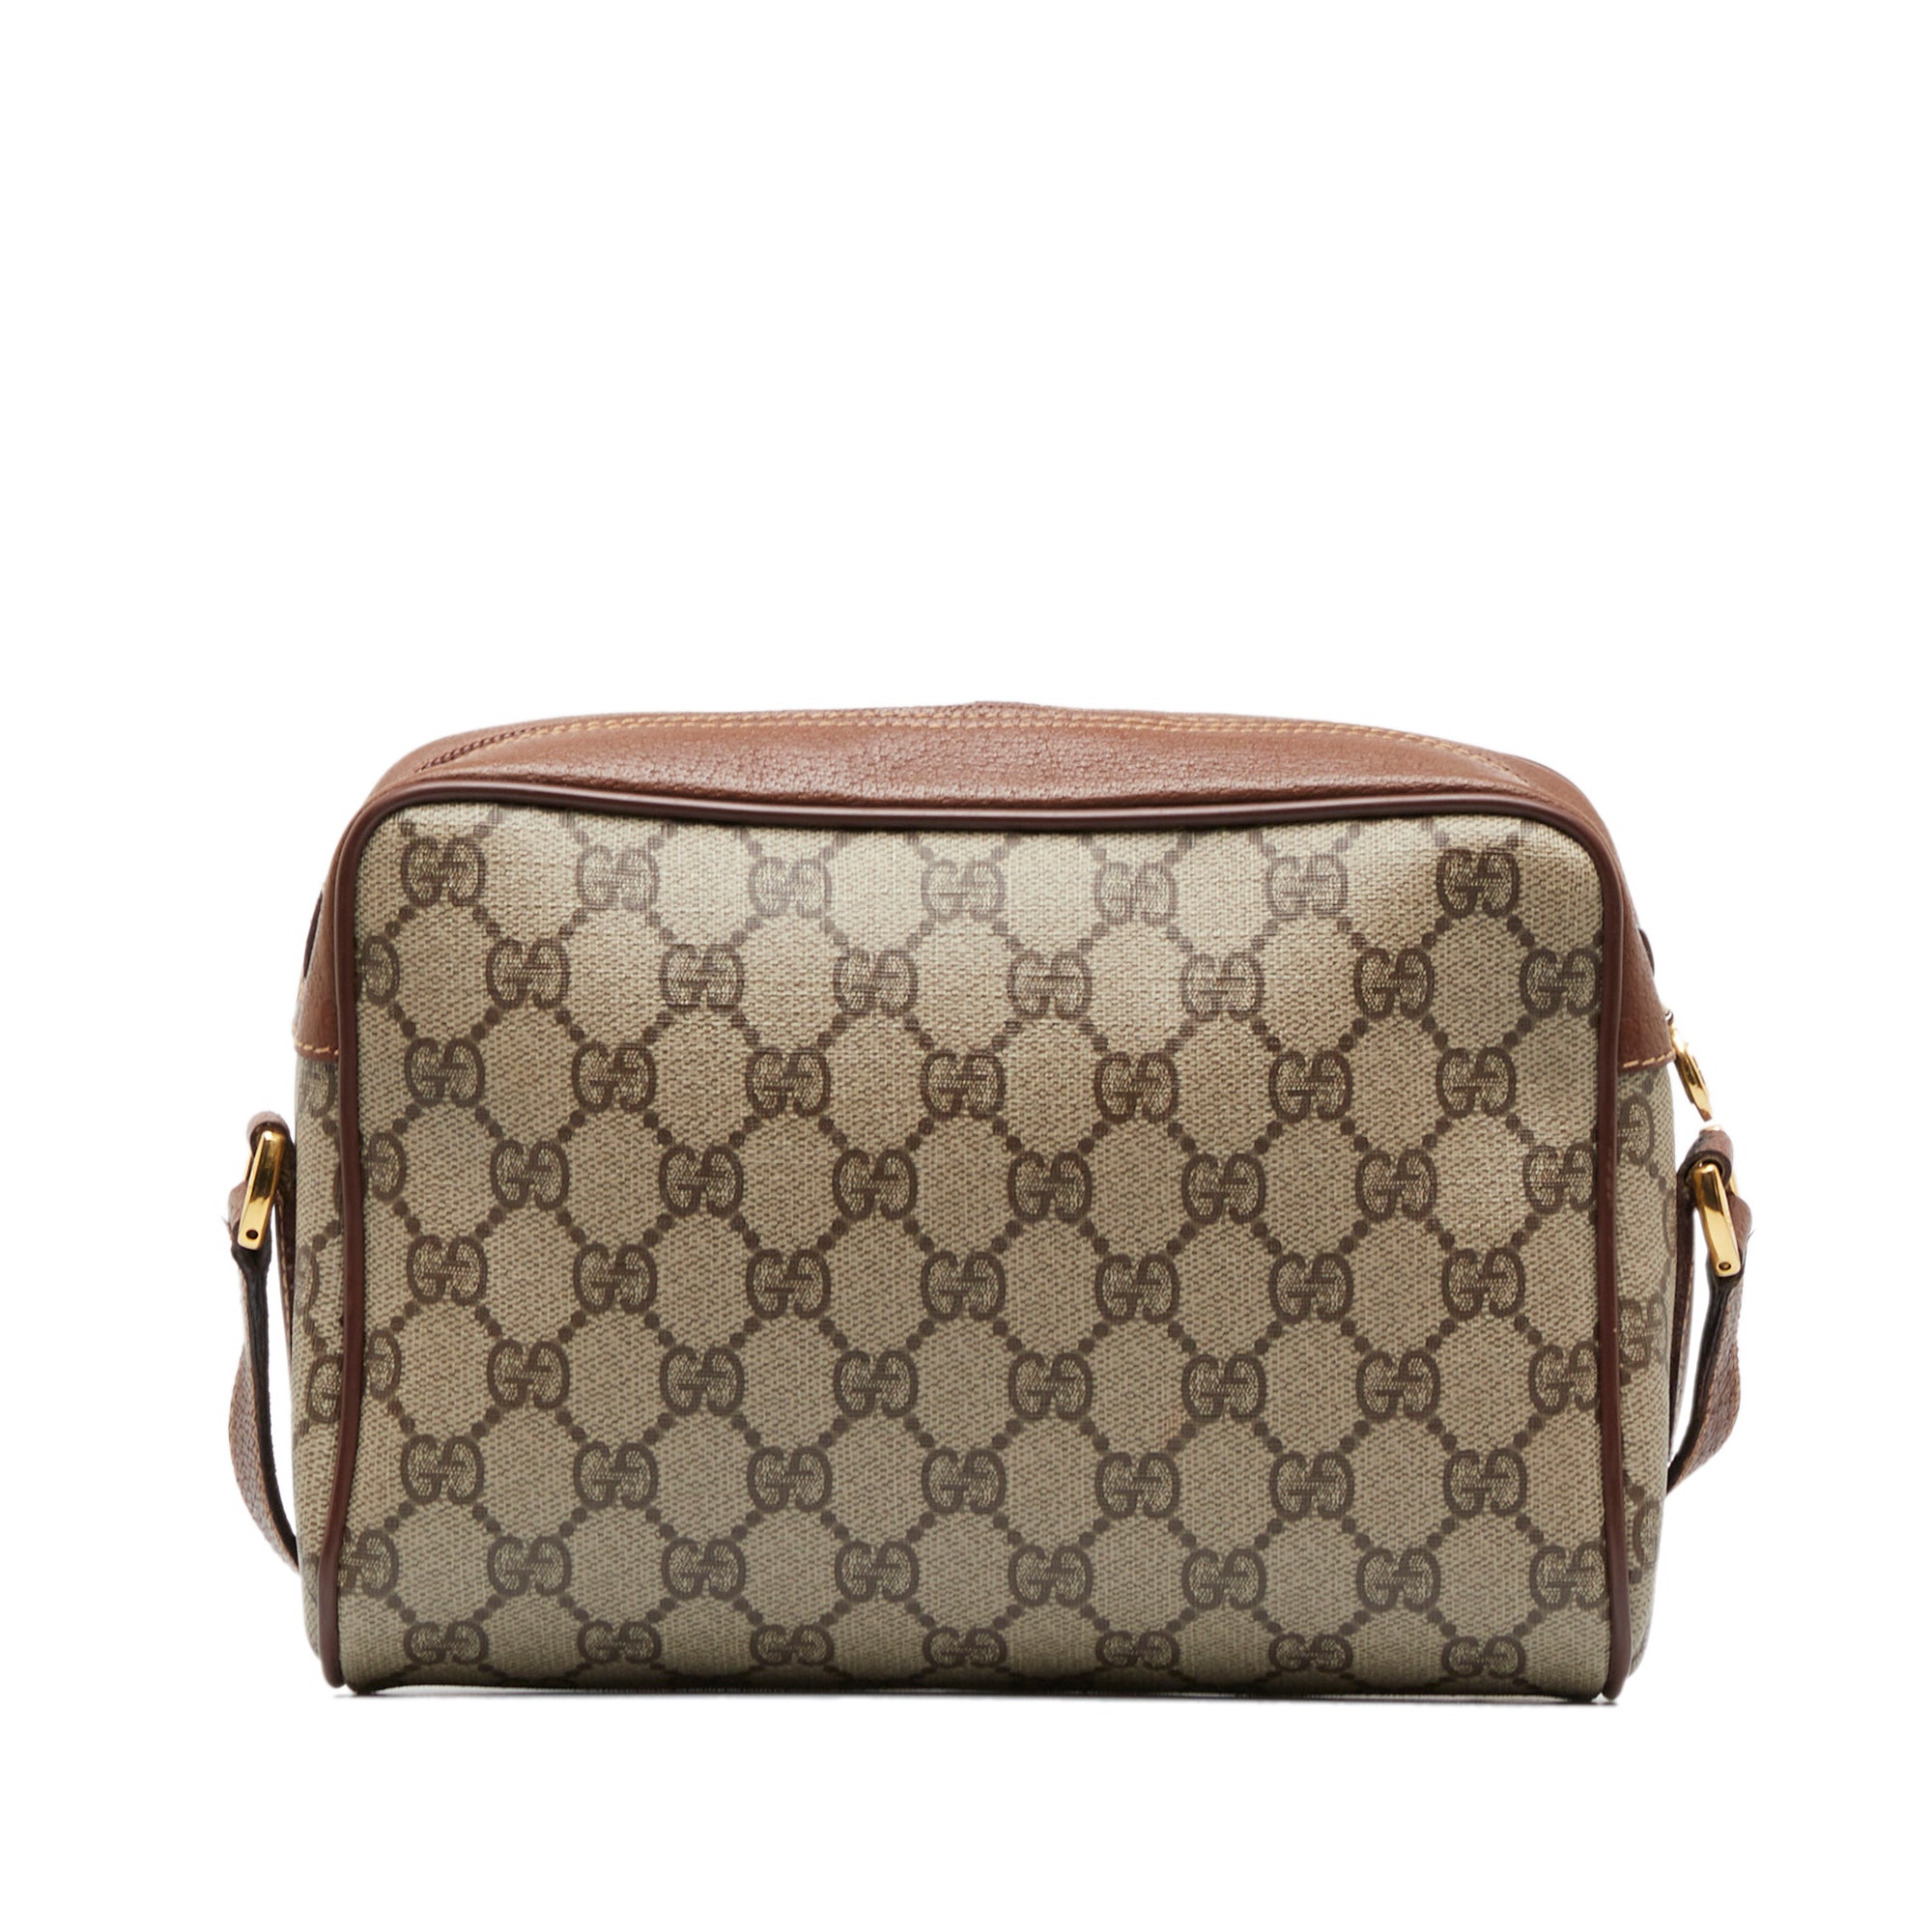 Gucci Ophidia luggage